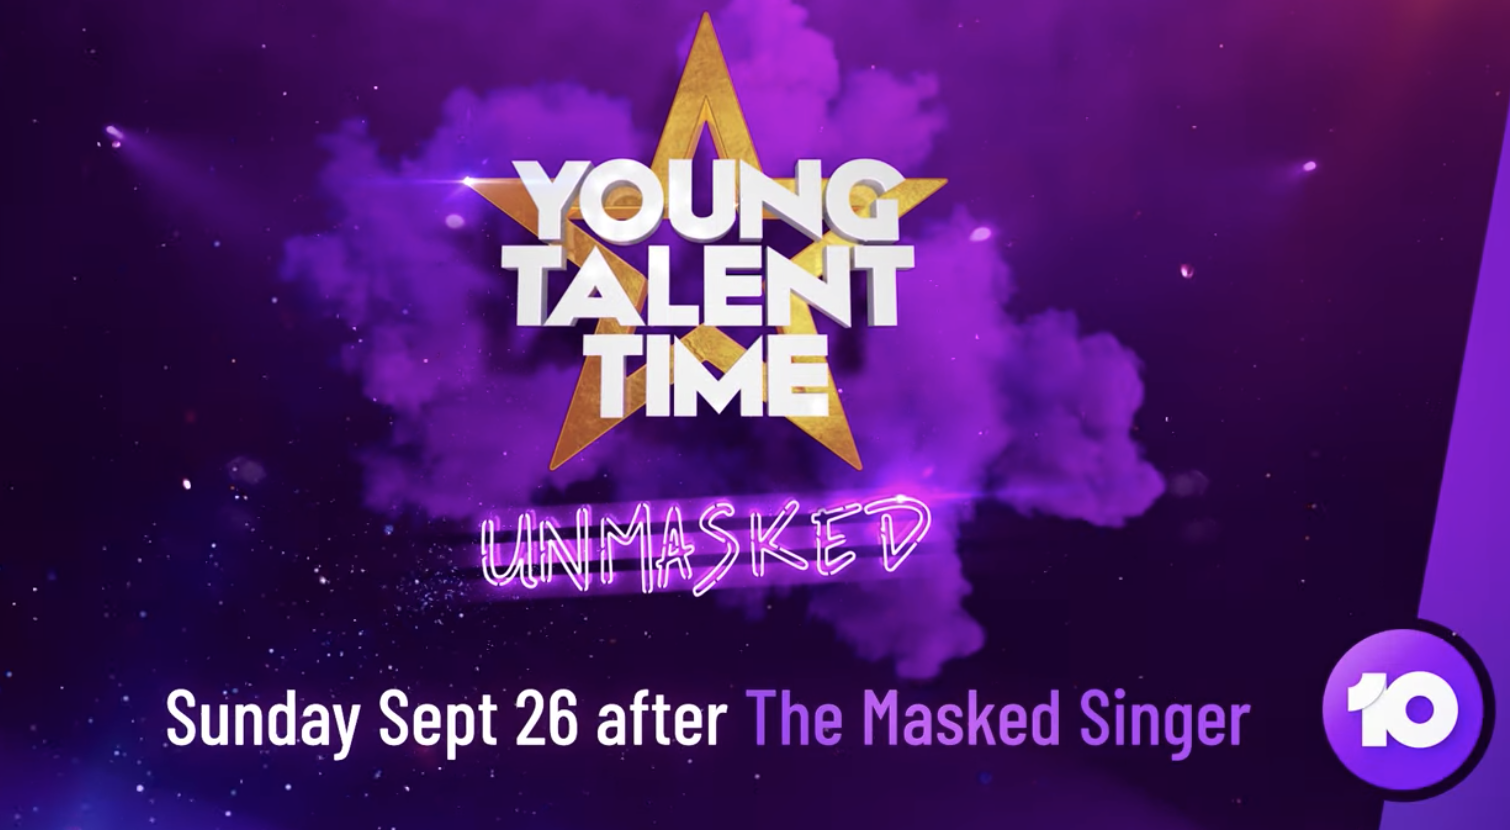 Channel 10 revives Young Talent Time with 50th anniversary special featuring Tina Arena & Dannii Minogue